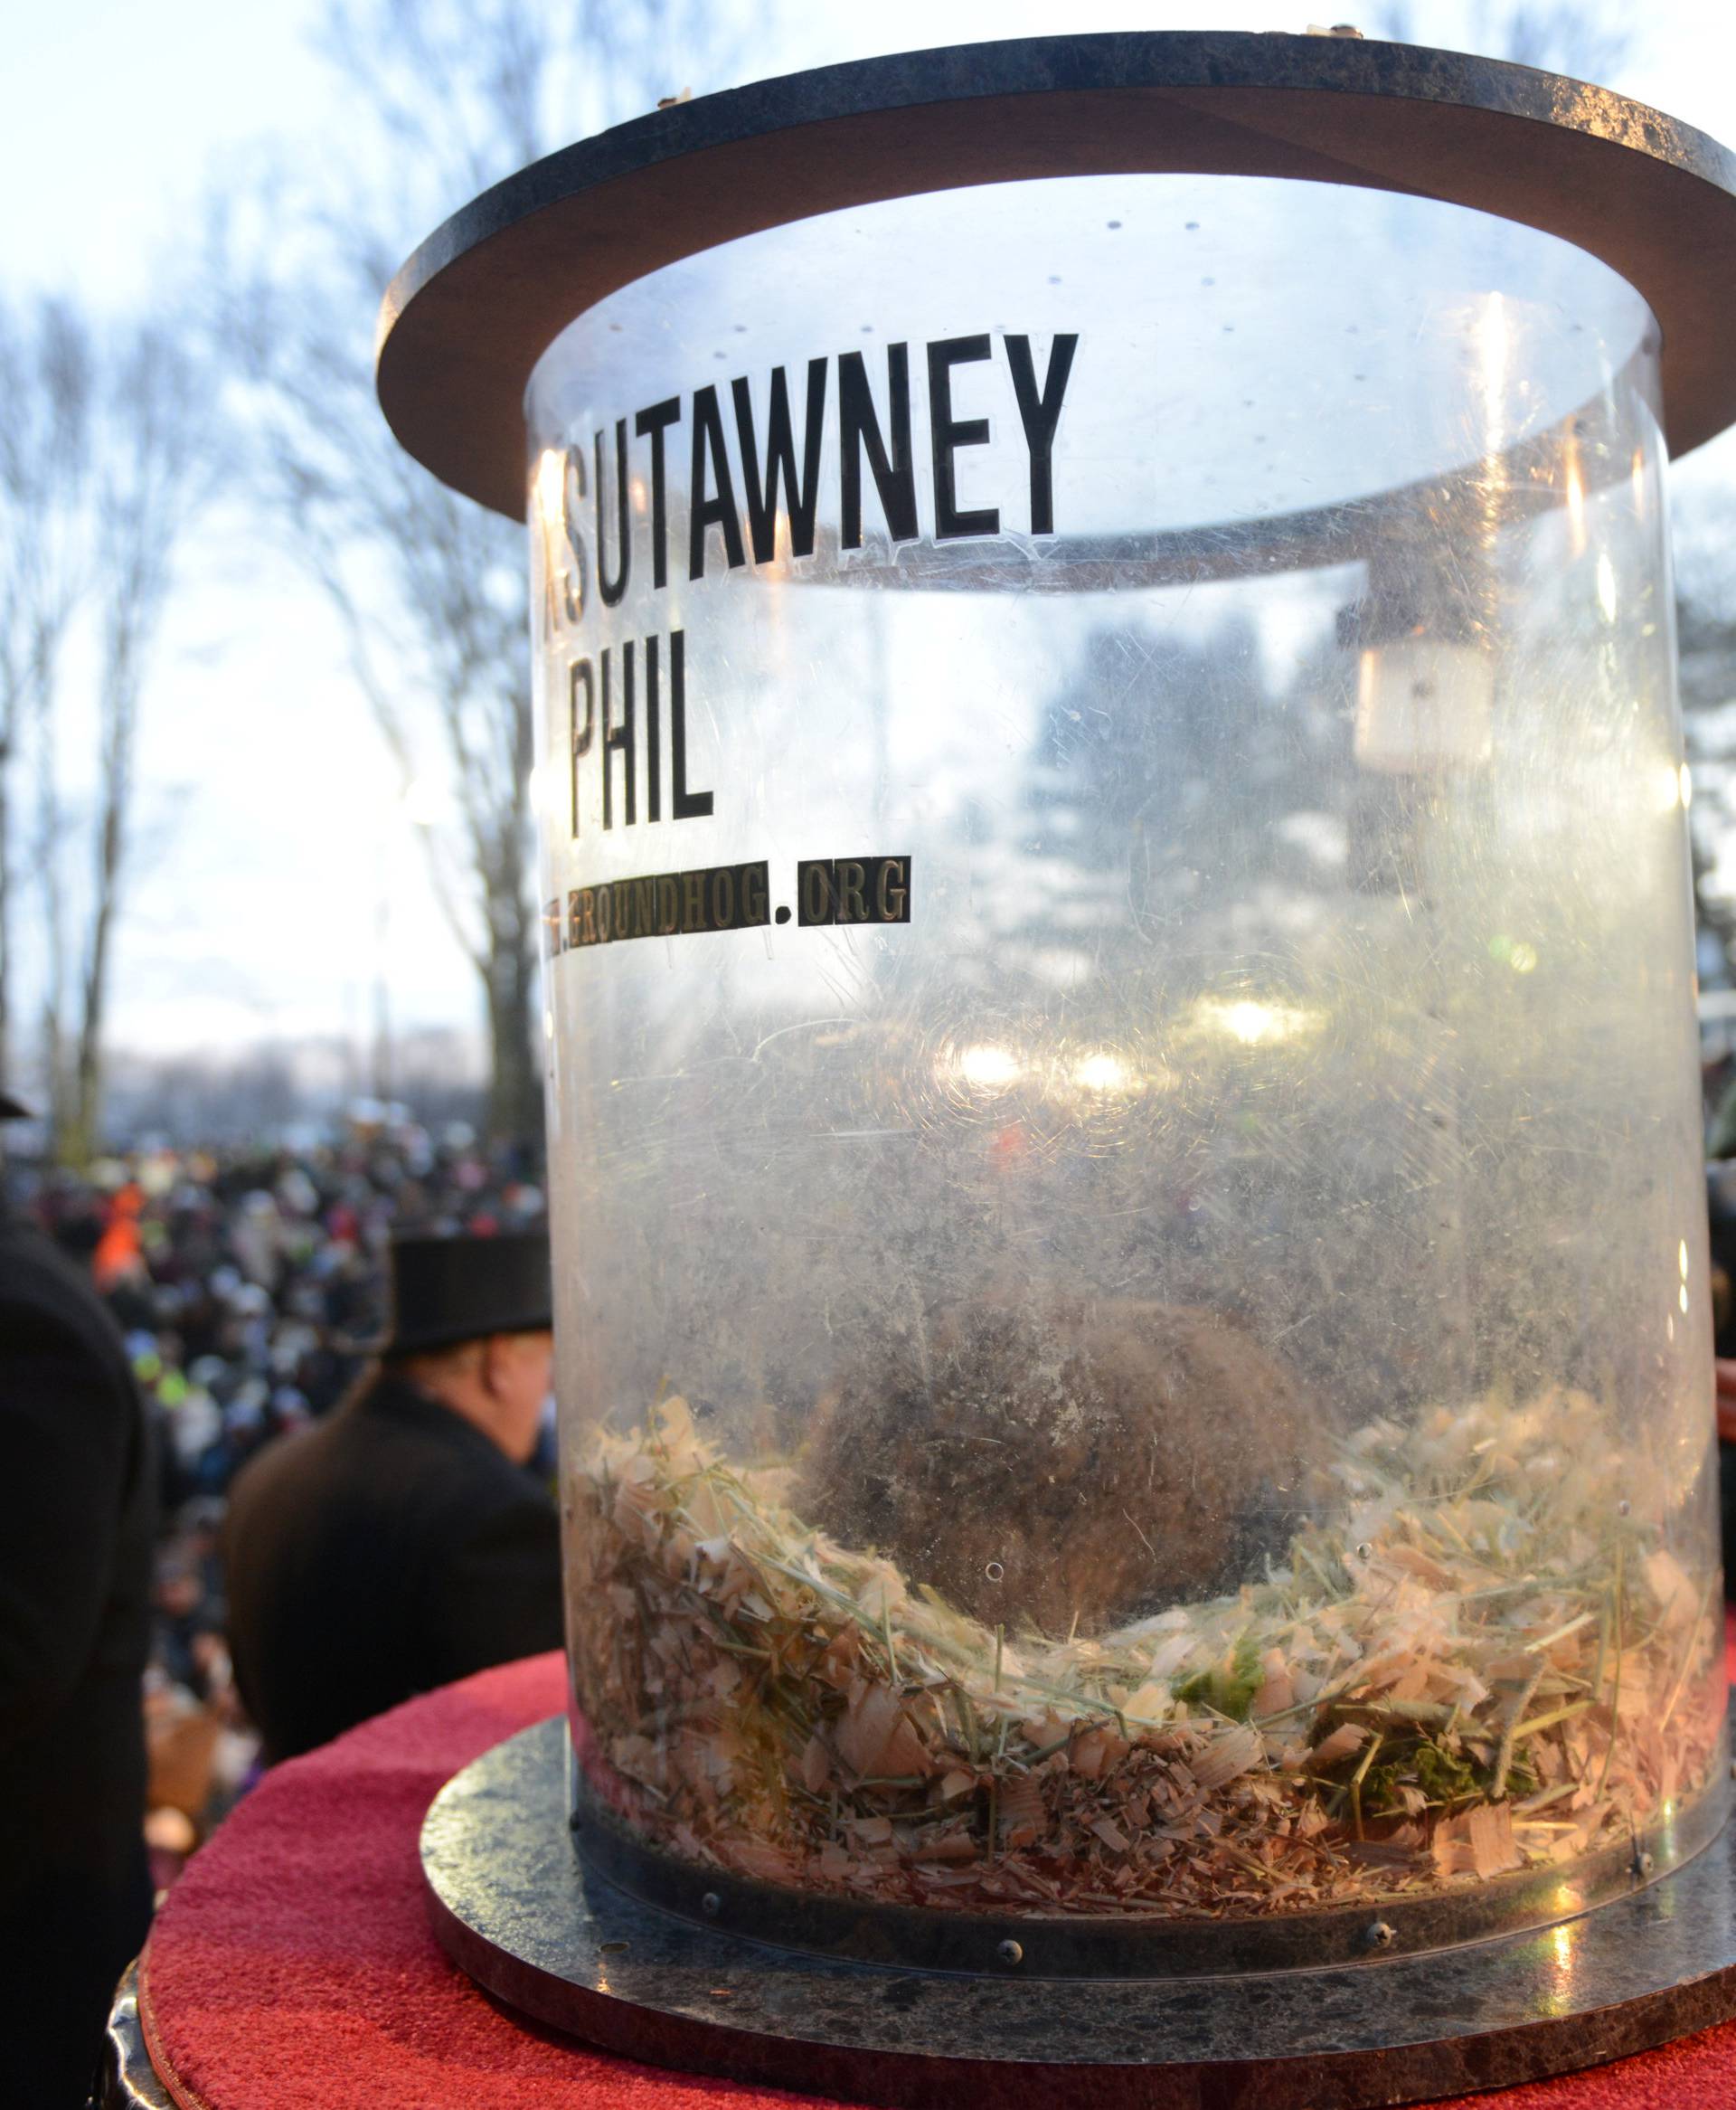 Punxsutawney Phil rests in his enclosure after his annual forecast on Groundhog Day in Punxsutawney